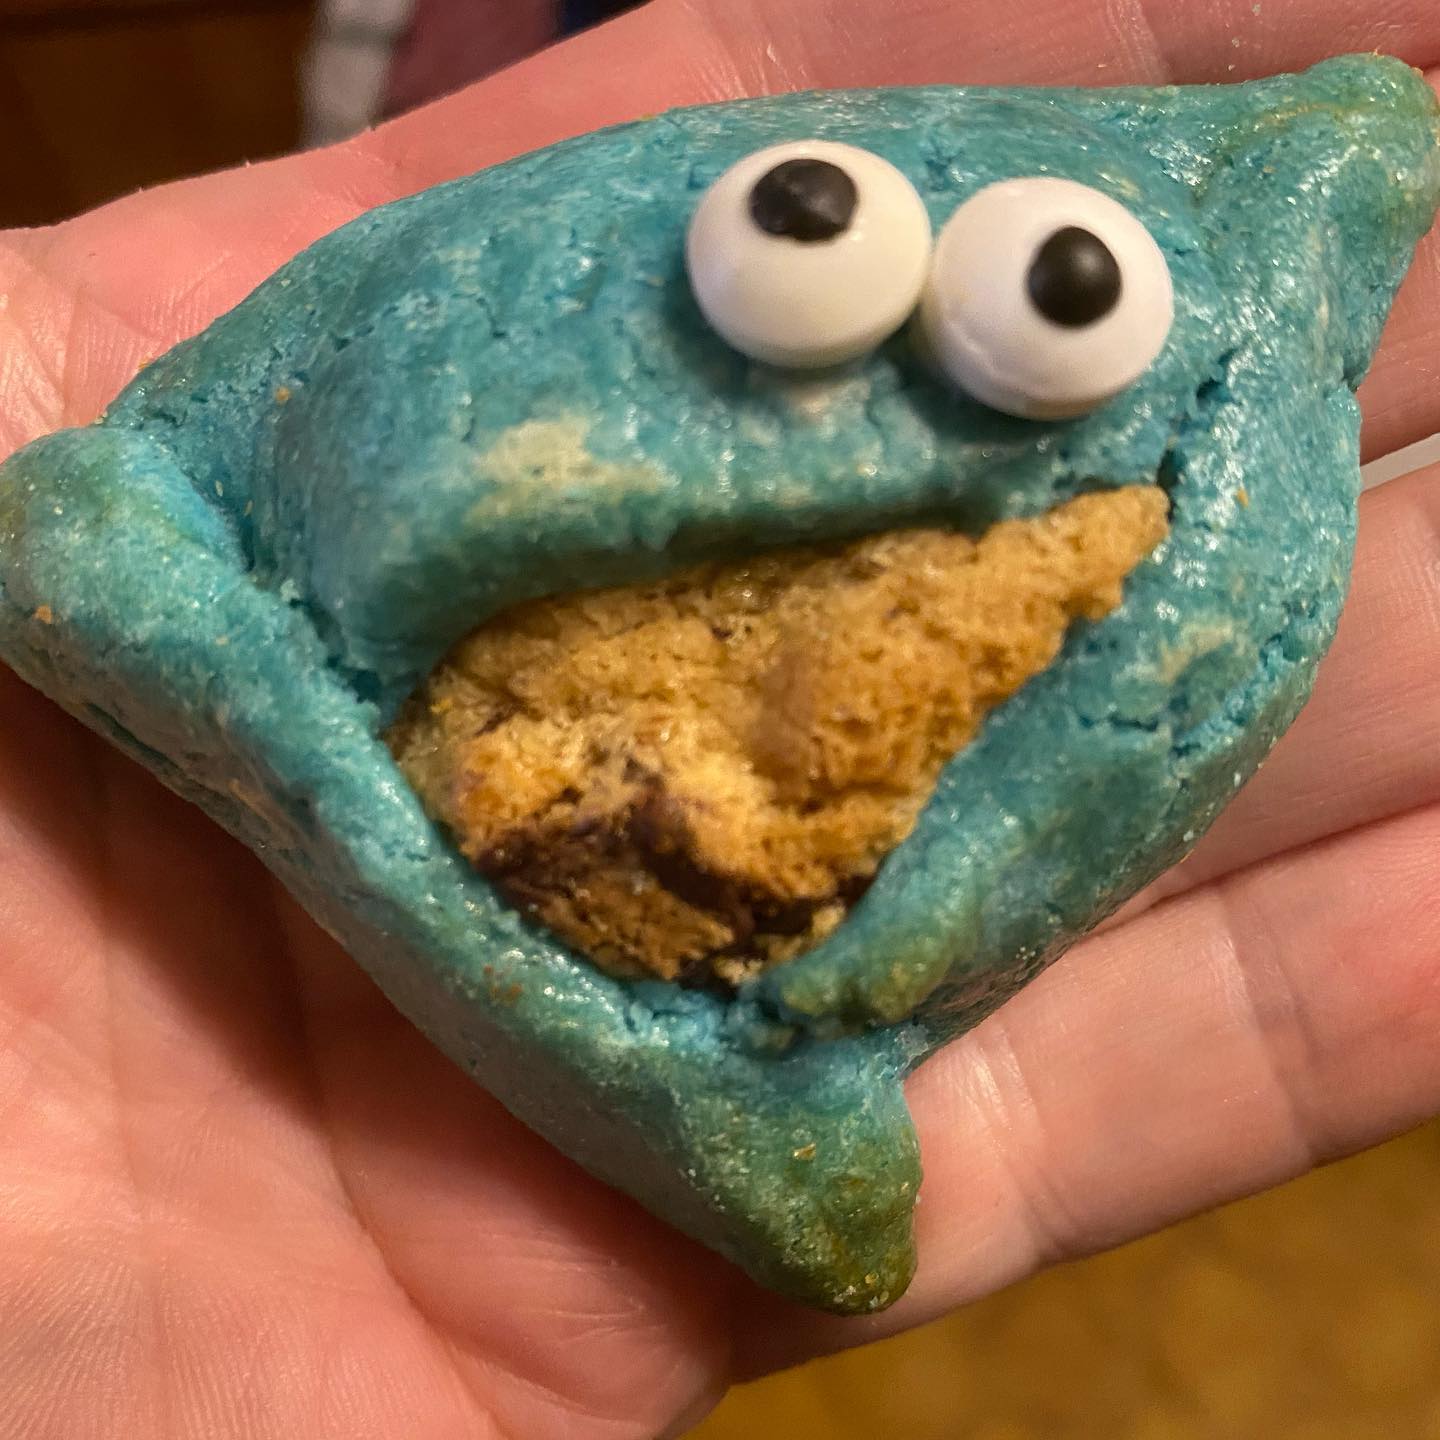 On nom nom nom nom!

Thank you, @sweetlybrooklyn. The package just arrived, no worse for the wear, and the Cookie Monster hamentashen were received with the glee I was hoping for. ð